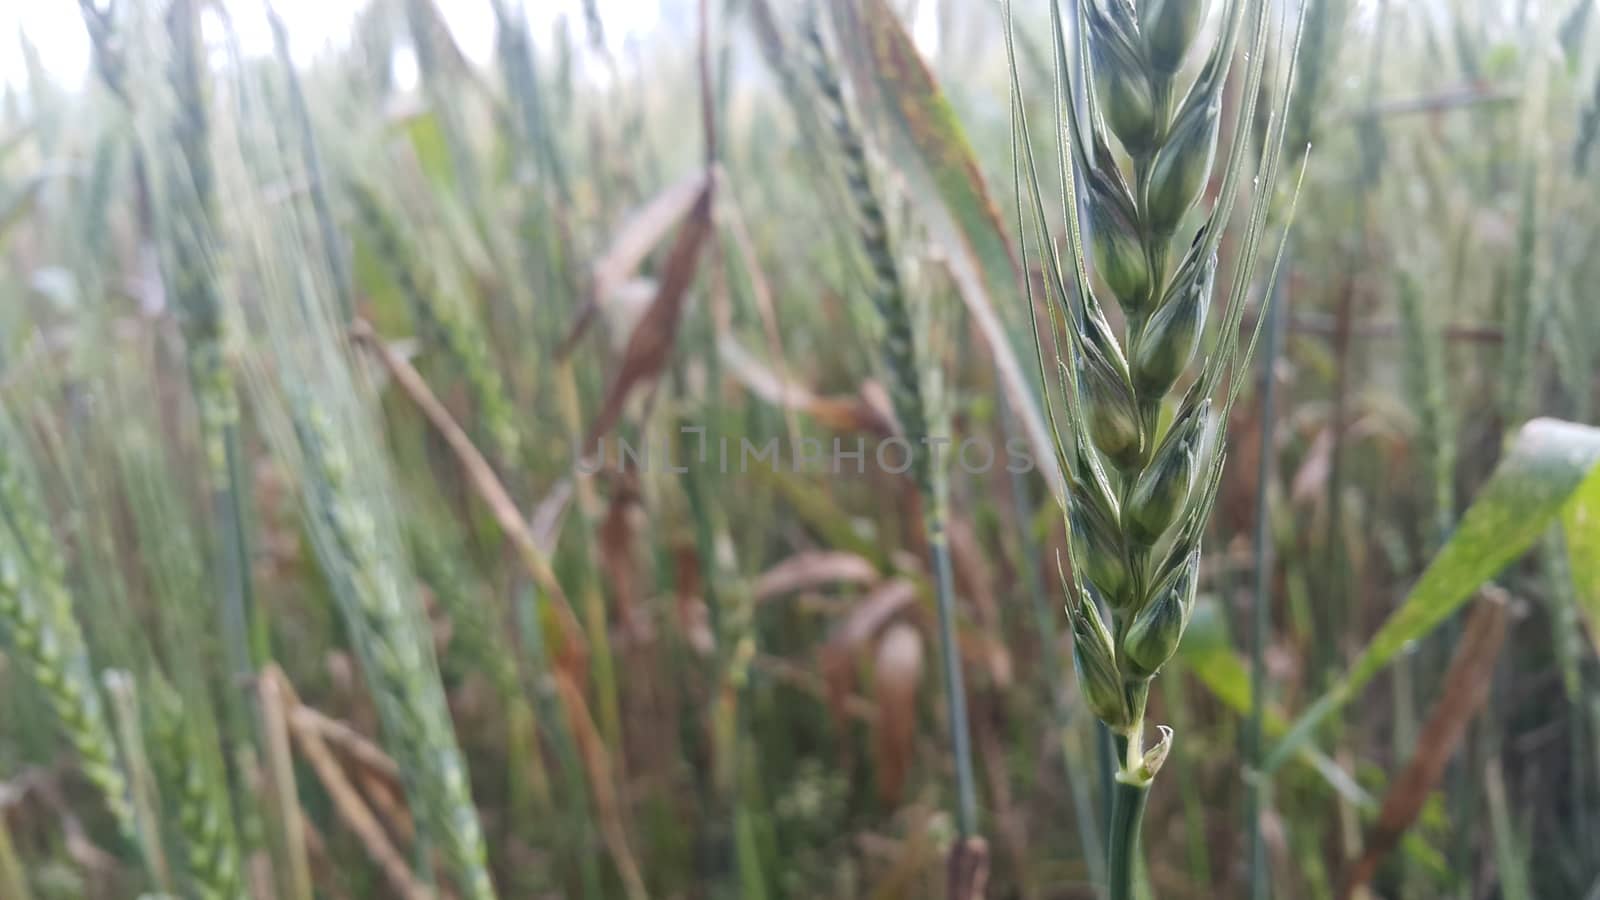 Closeup view of barley spikelets or rye in barley field. Green dried barley focused in large agricultural rural wheat field.